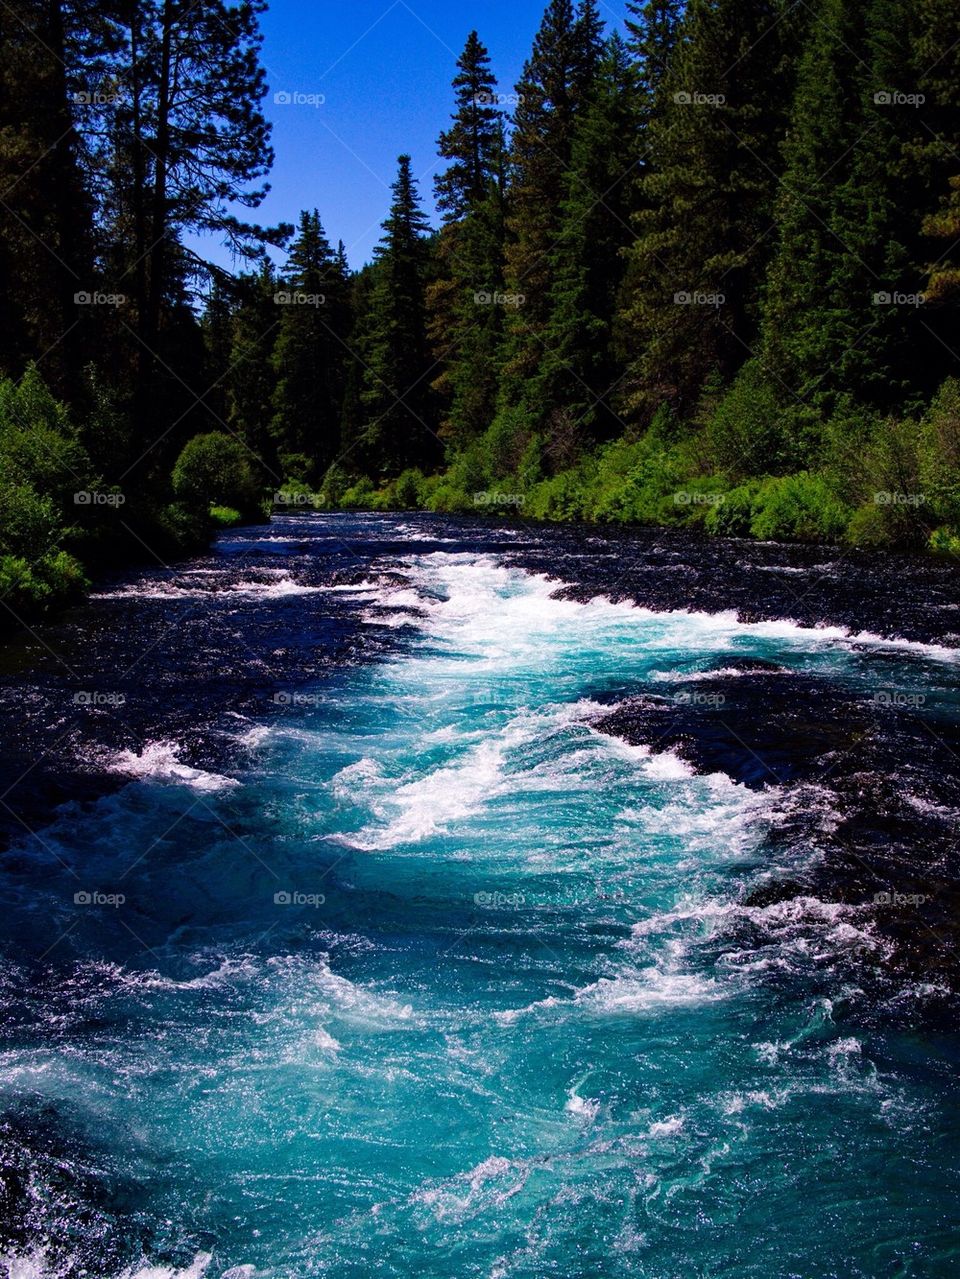 Rapids at the deep blue and turquoise waters of the Metolius River at Wizard Falls in Central Oregon on a sunny summer day. 